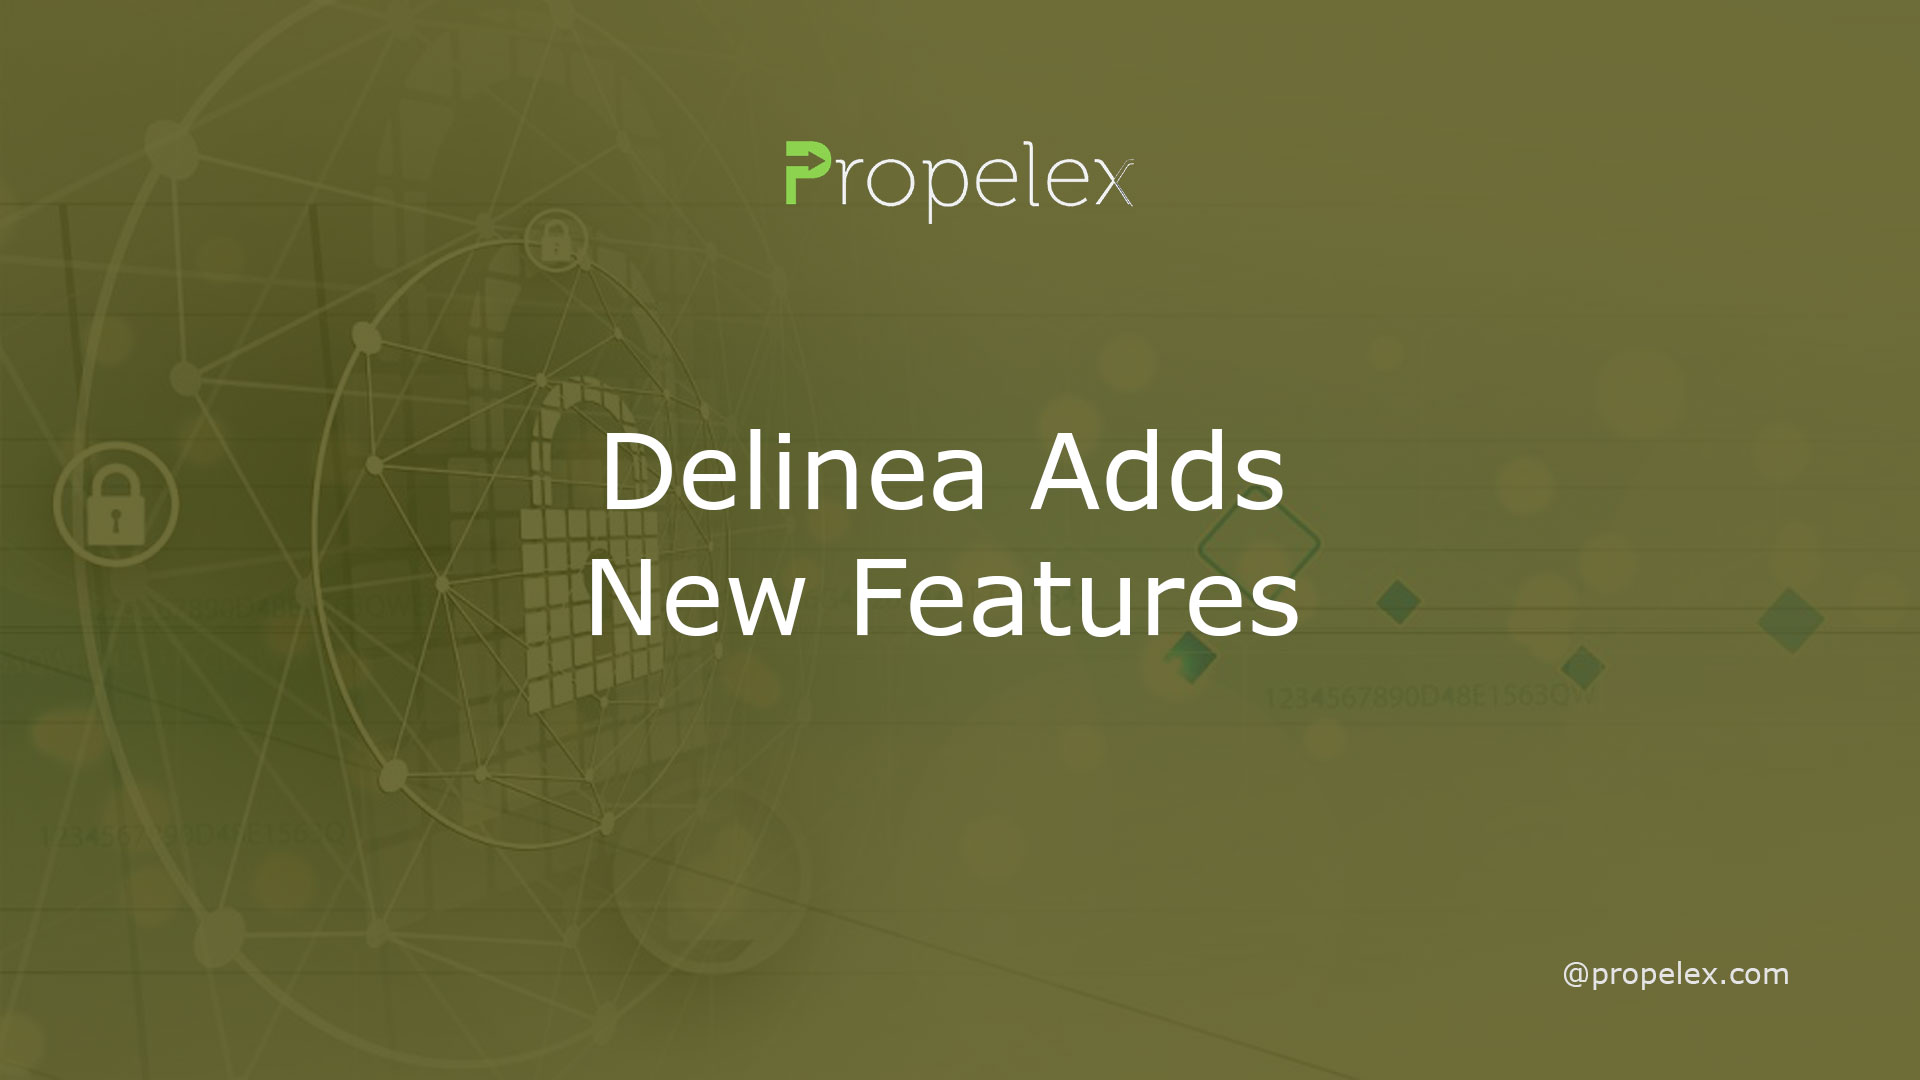 Delinea Adds New Features